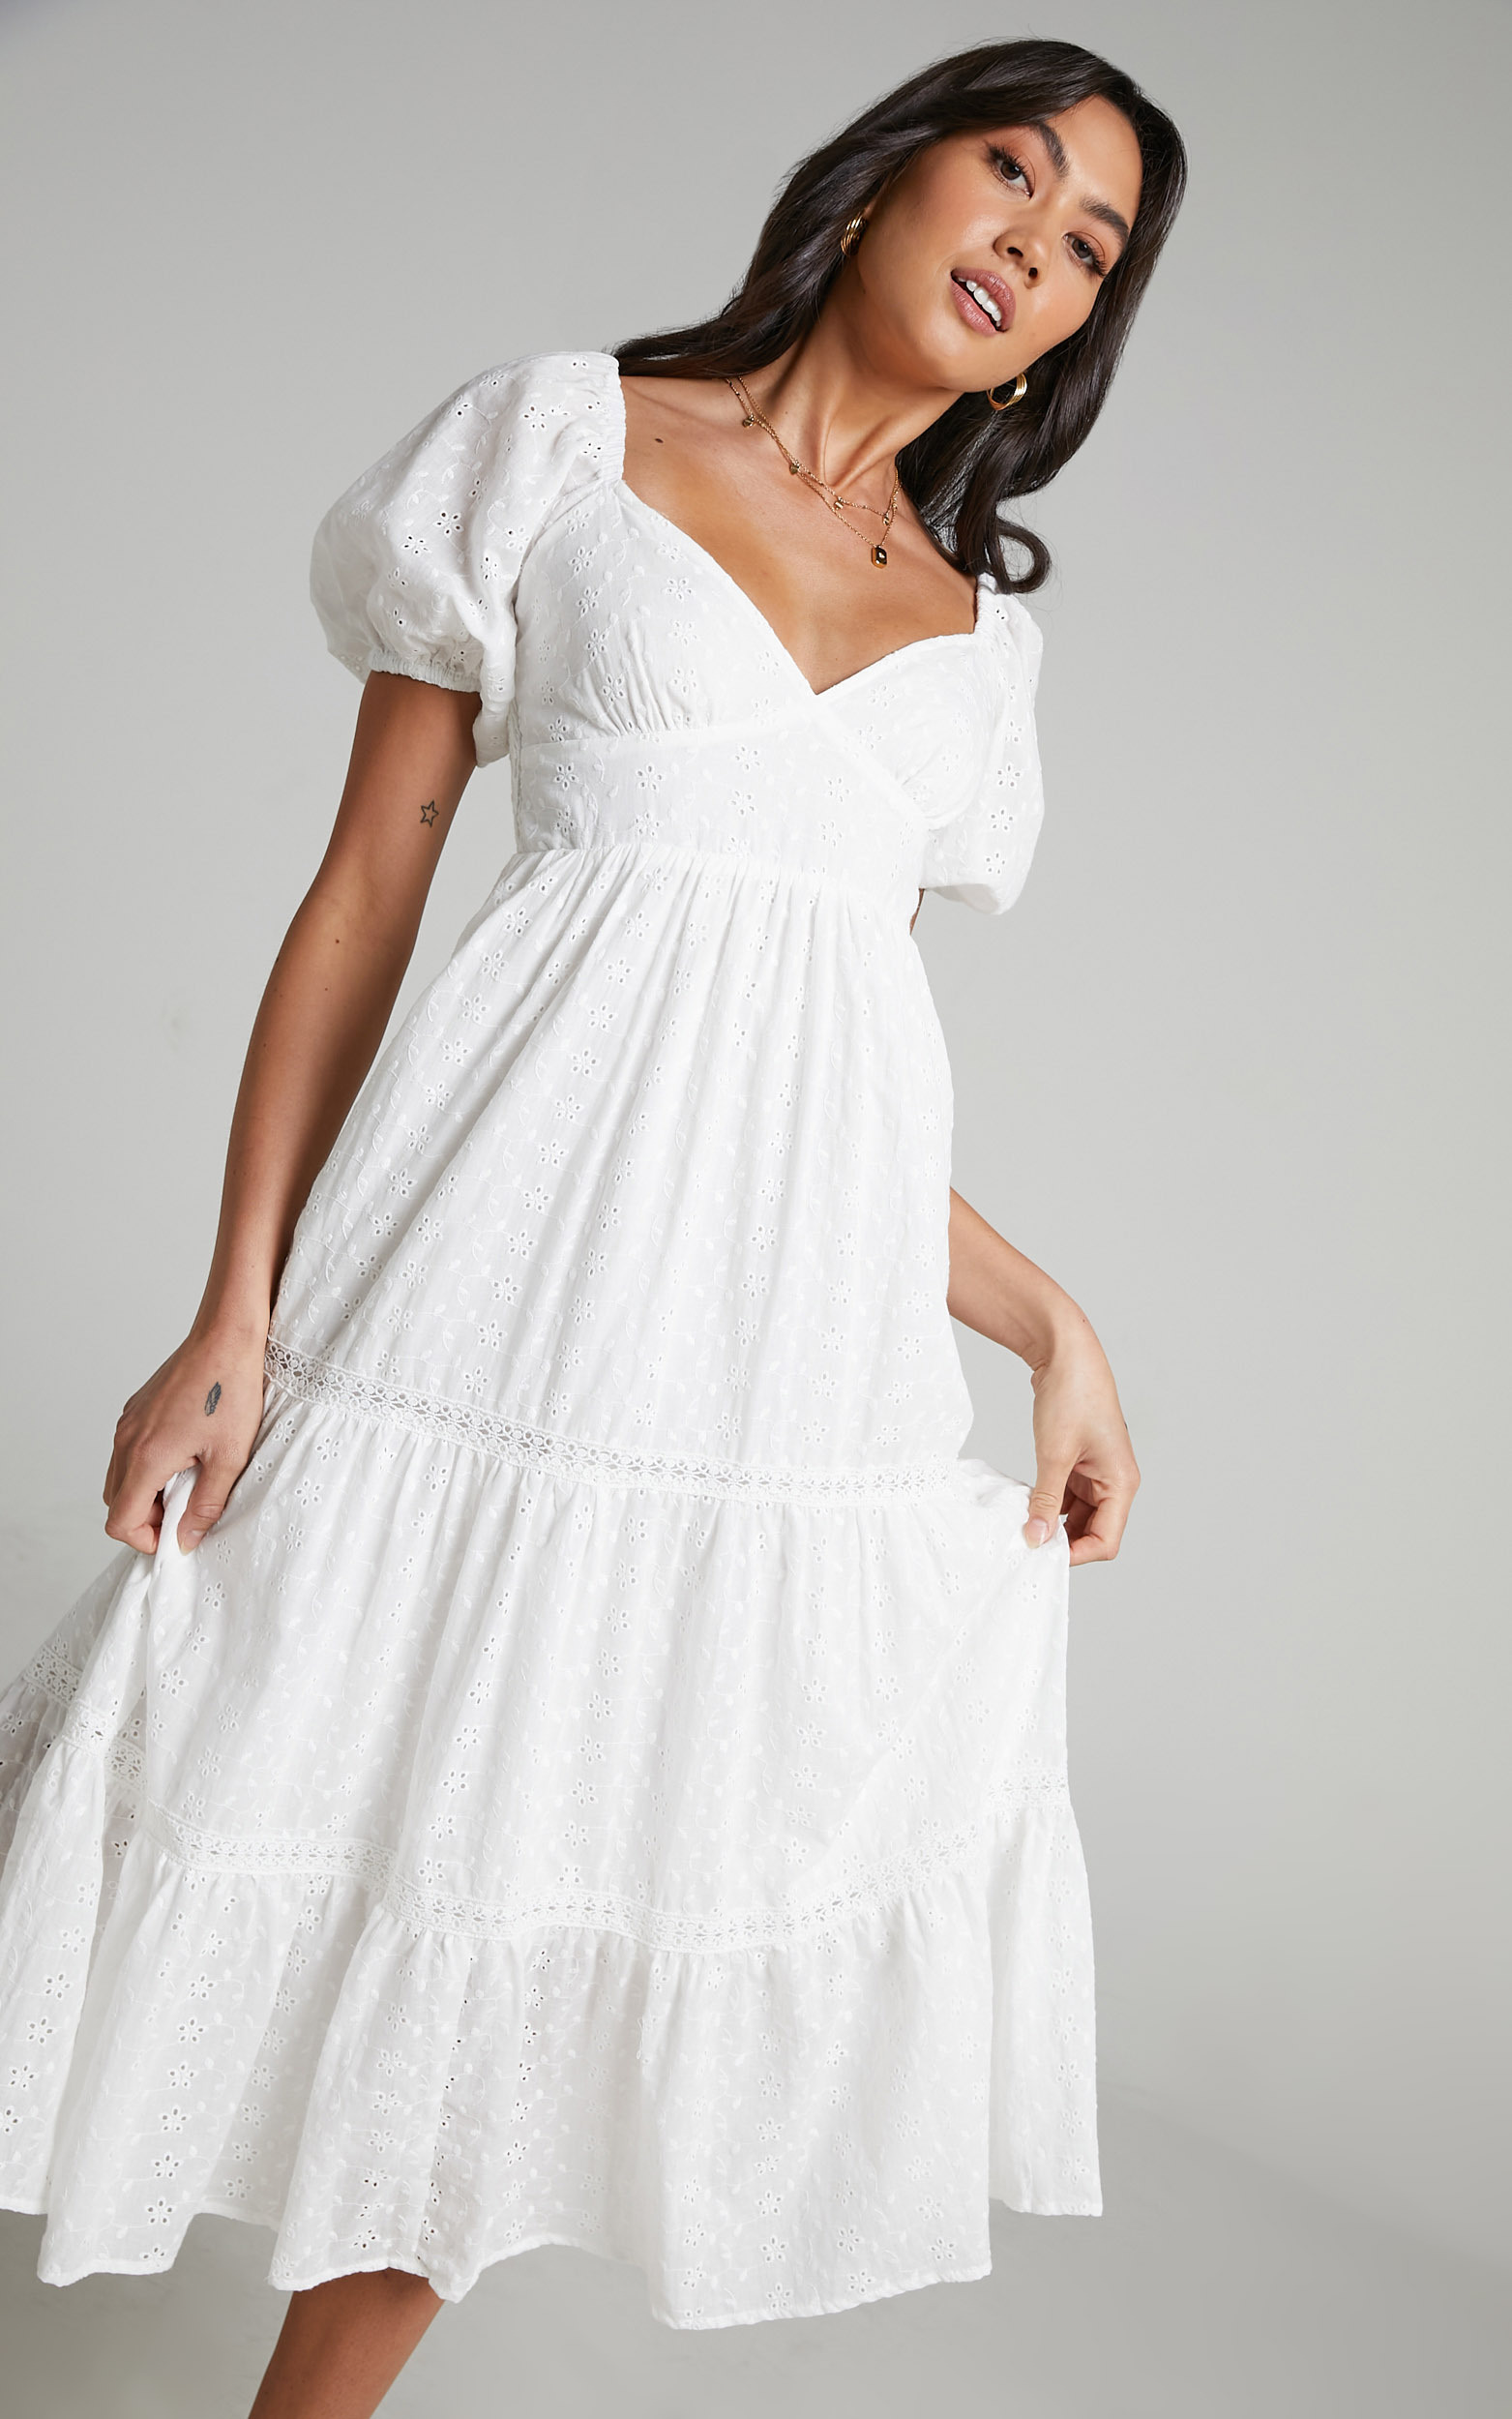 Yanny puff Sleeve Midi Dress with Shirred bust in White - 04, WHT1, hi-res image number null